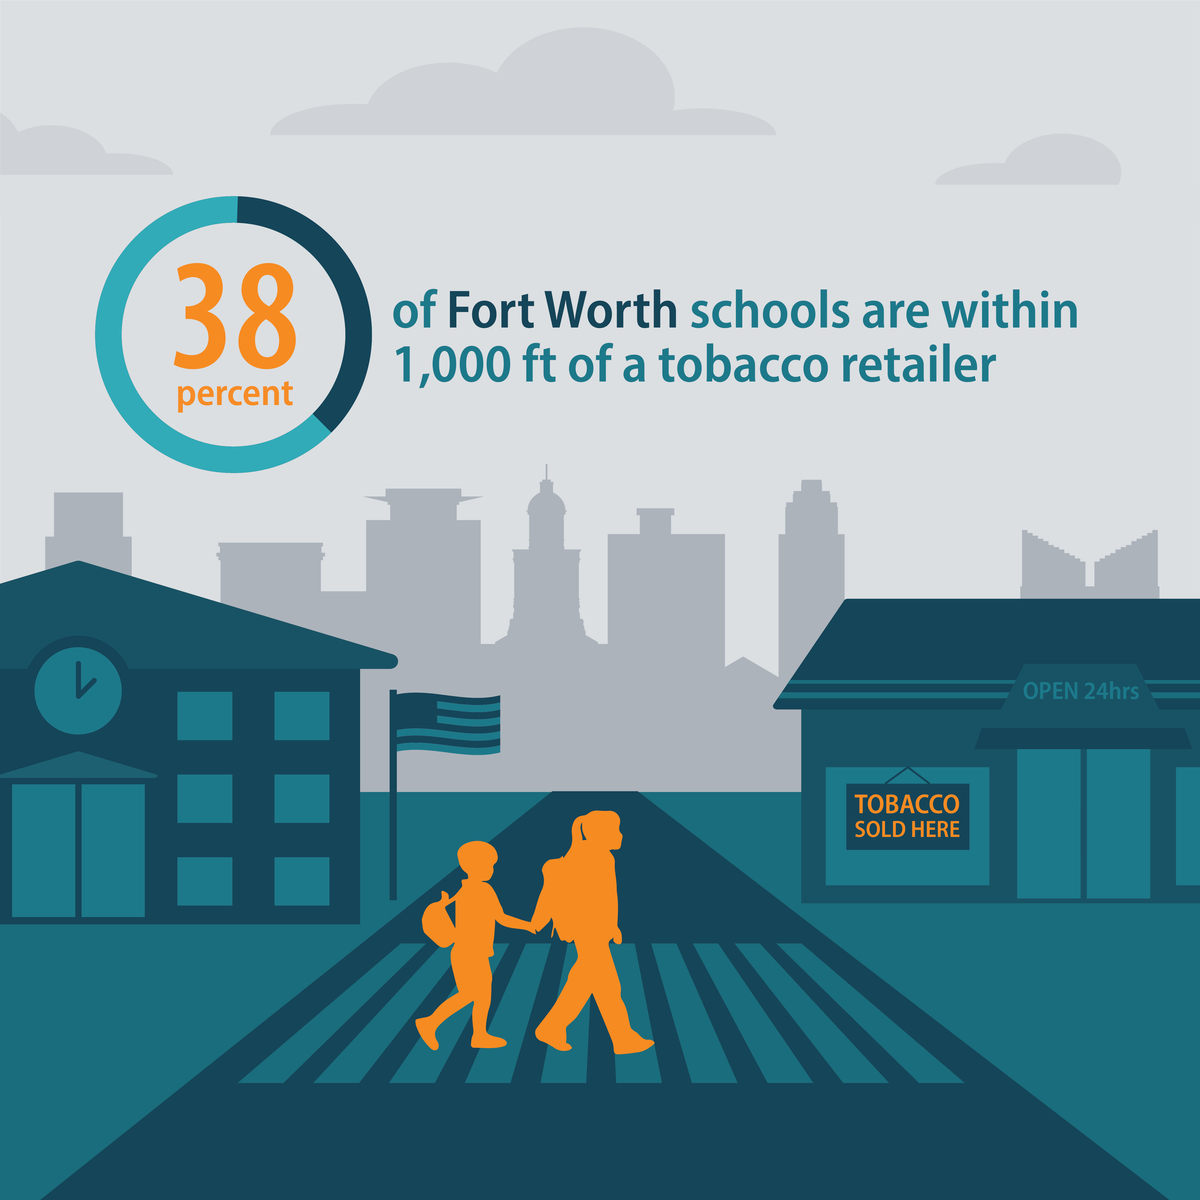 38 percent of Fort Worth schools are within 1,000 feet of a tobacco retailer